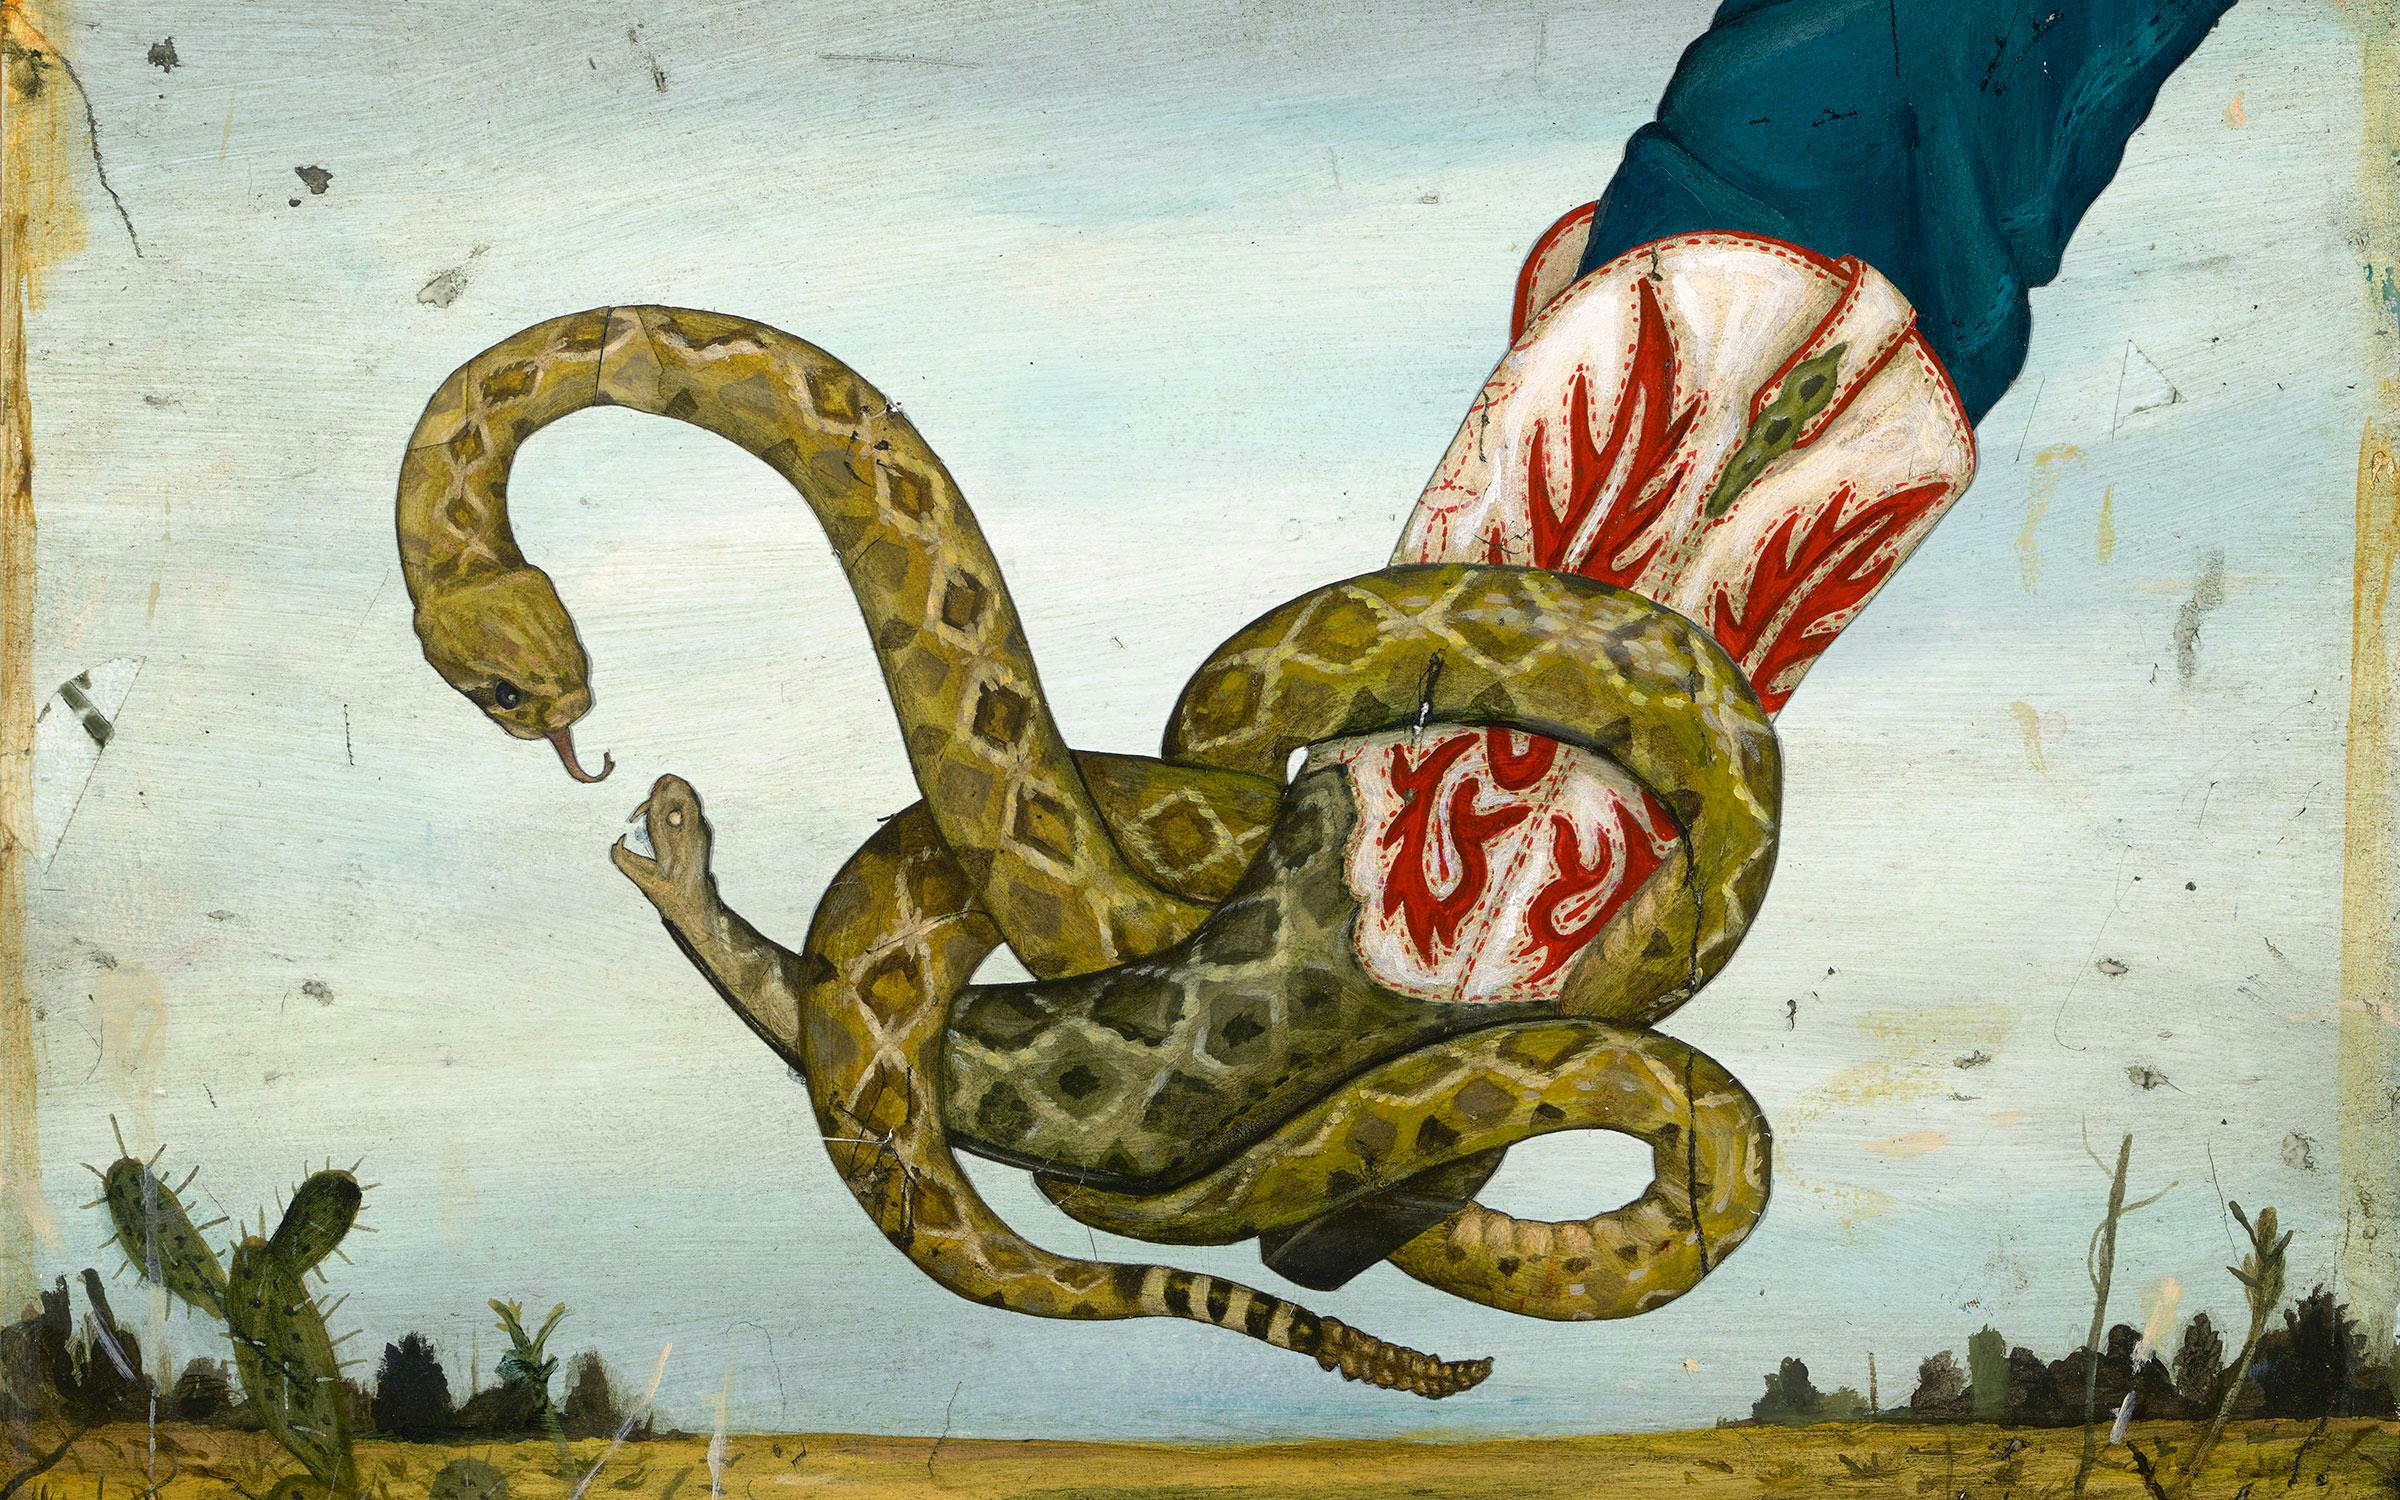 https://img.texasmonthly.com/2022/06/nobody-loves-a-rattlesnake.jpg?auto=compress&crop=faces&fit=fit&fm=pjpg&ixlib=php-3.3.1&q=45